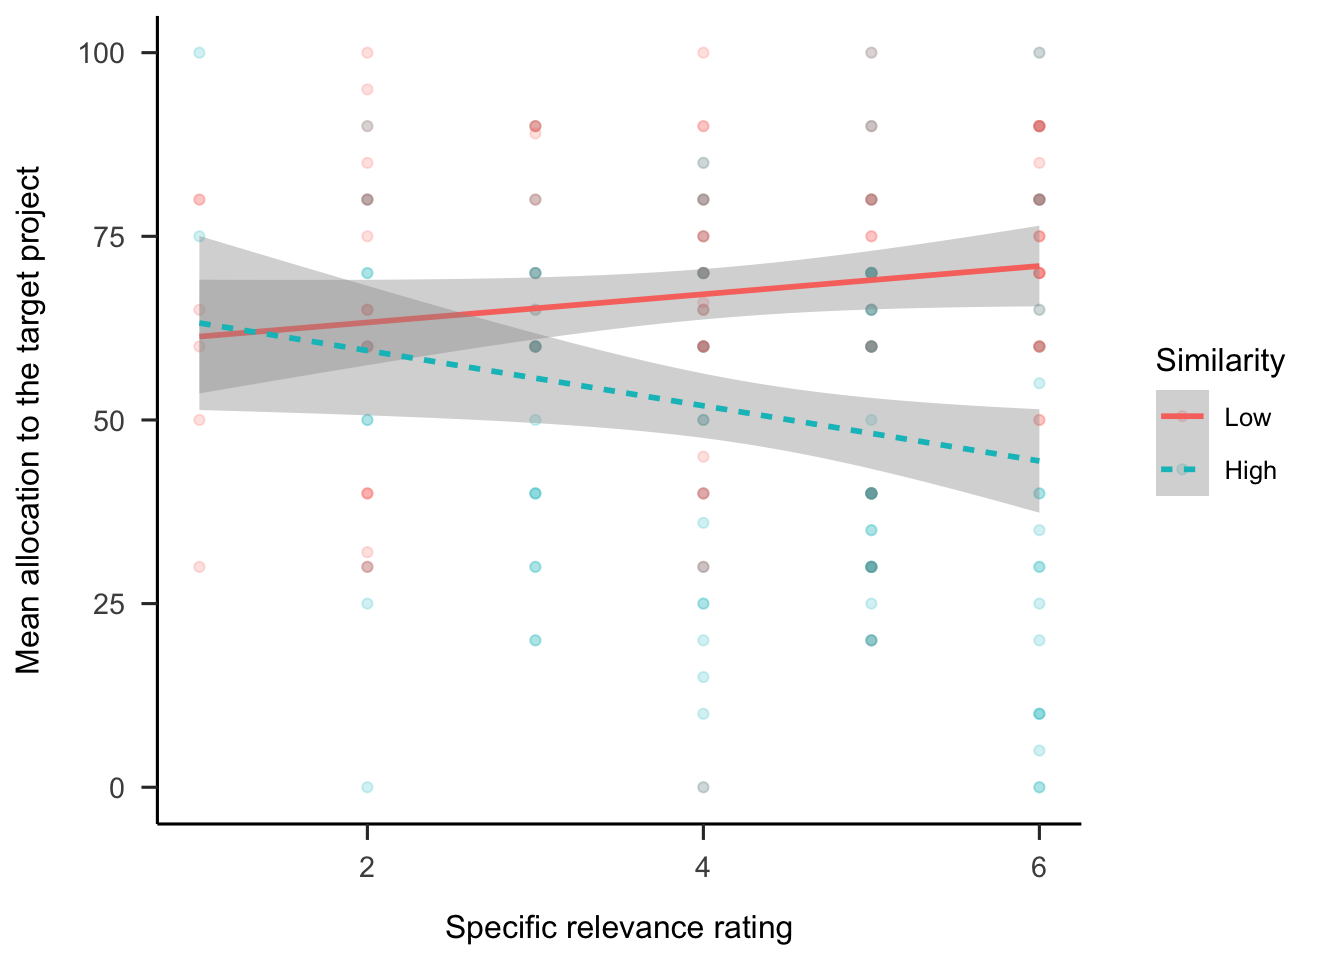 Mean allocation to the target project, by specific relevance rating and similarity condition. LOESS method was used for smoothing over trials and the shading represents 95% confidence intervals. Raw data are plotted in the background.